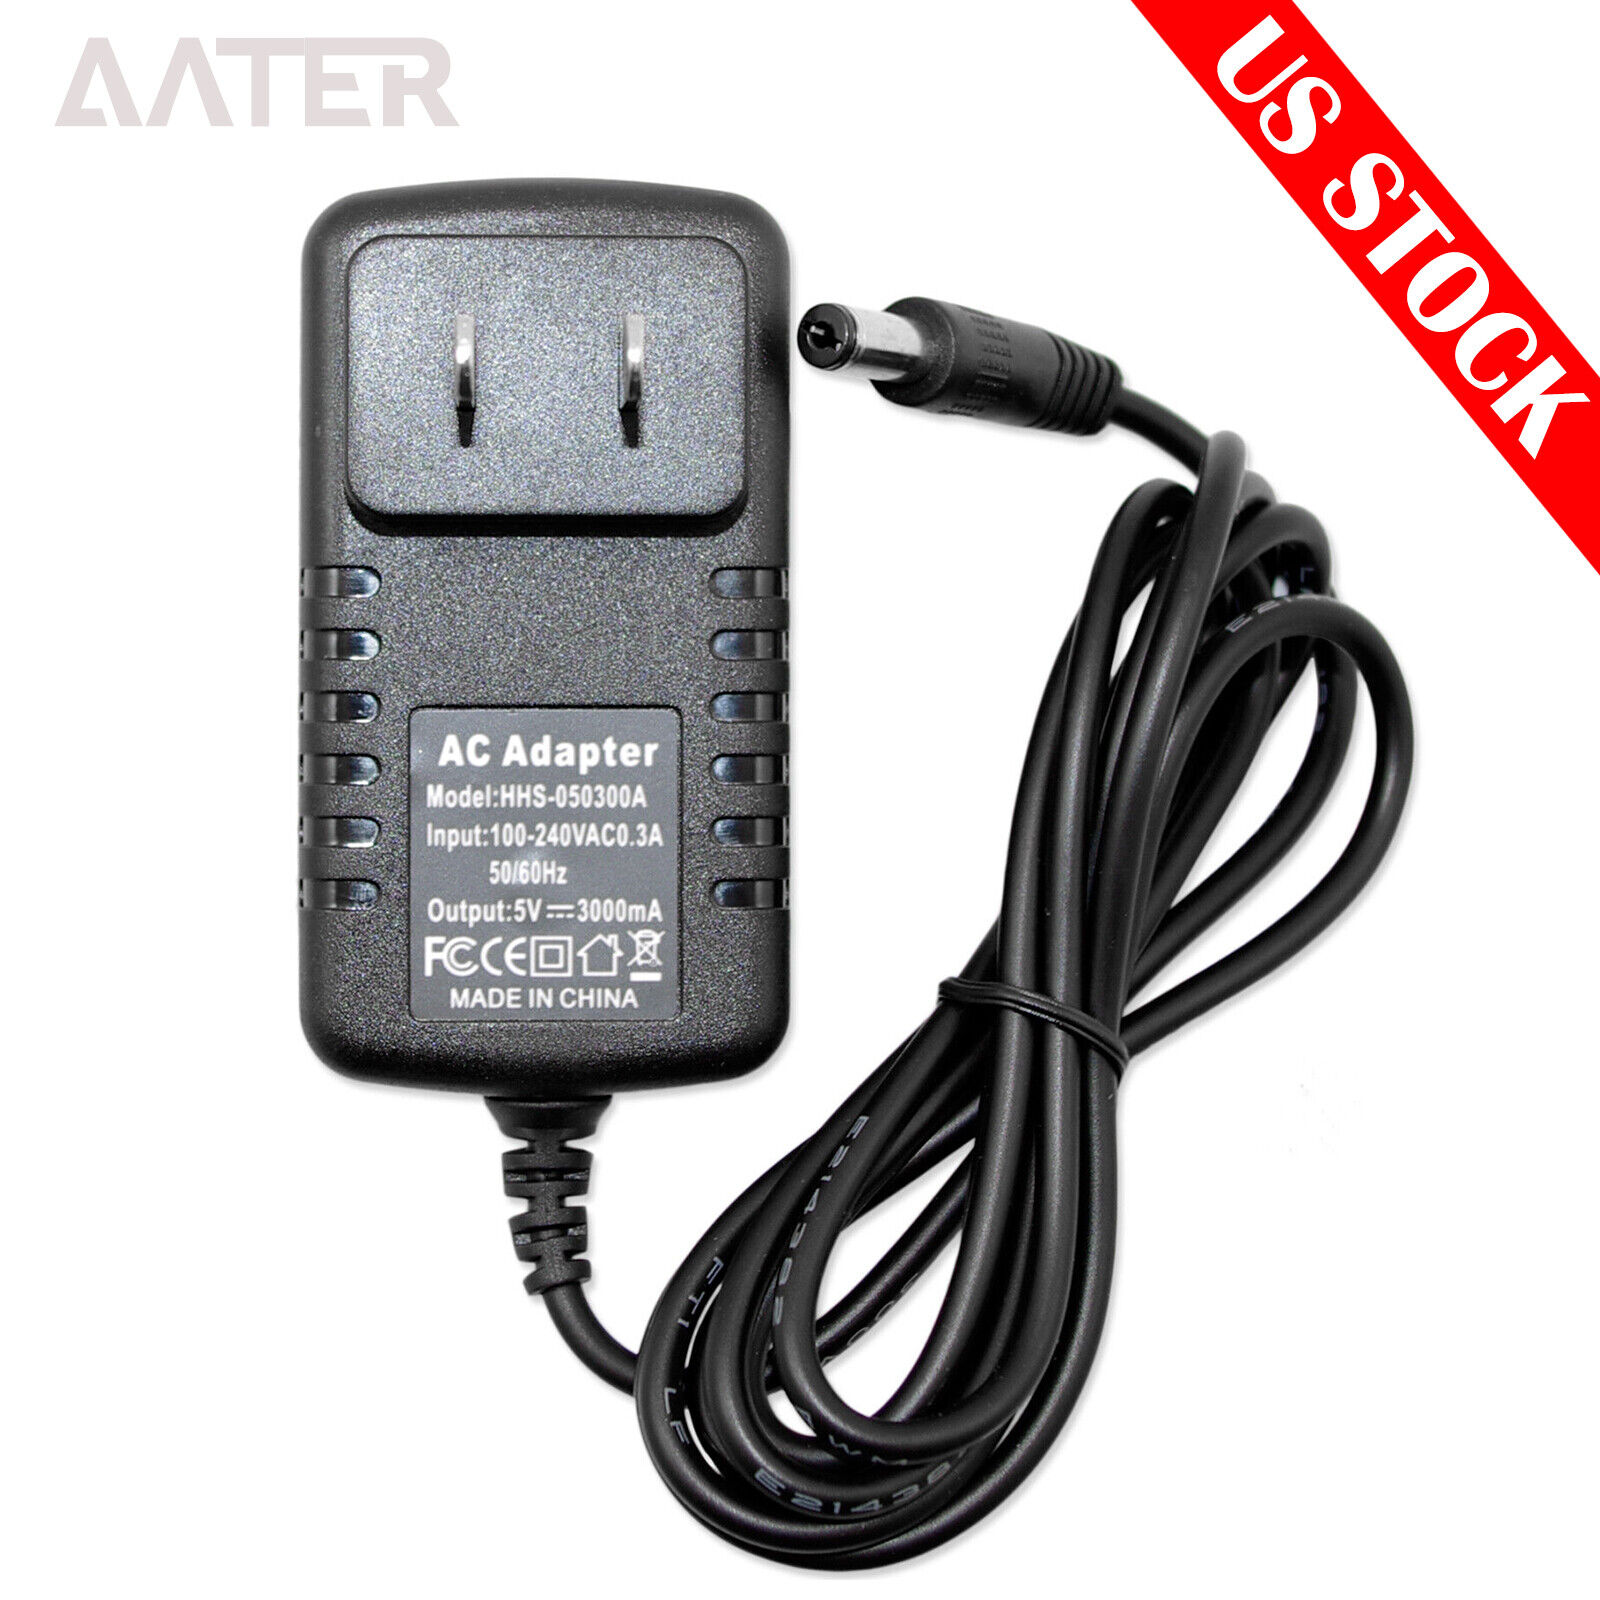 AC Converter Adapter DC 5V 3A Power Supply Charger 5.5mm x 2.1mm US 3000mA